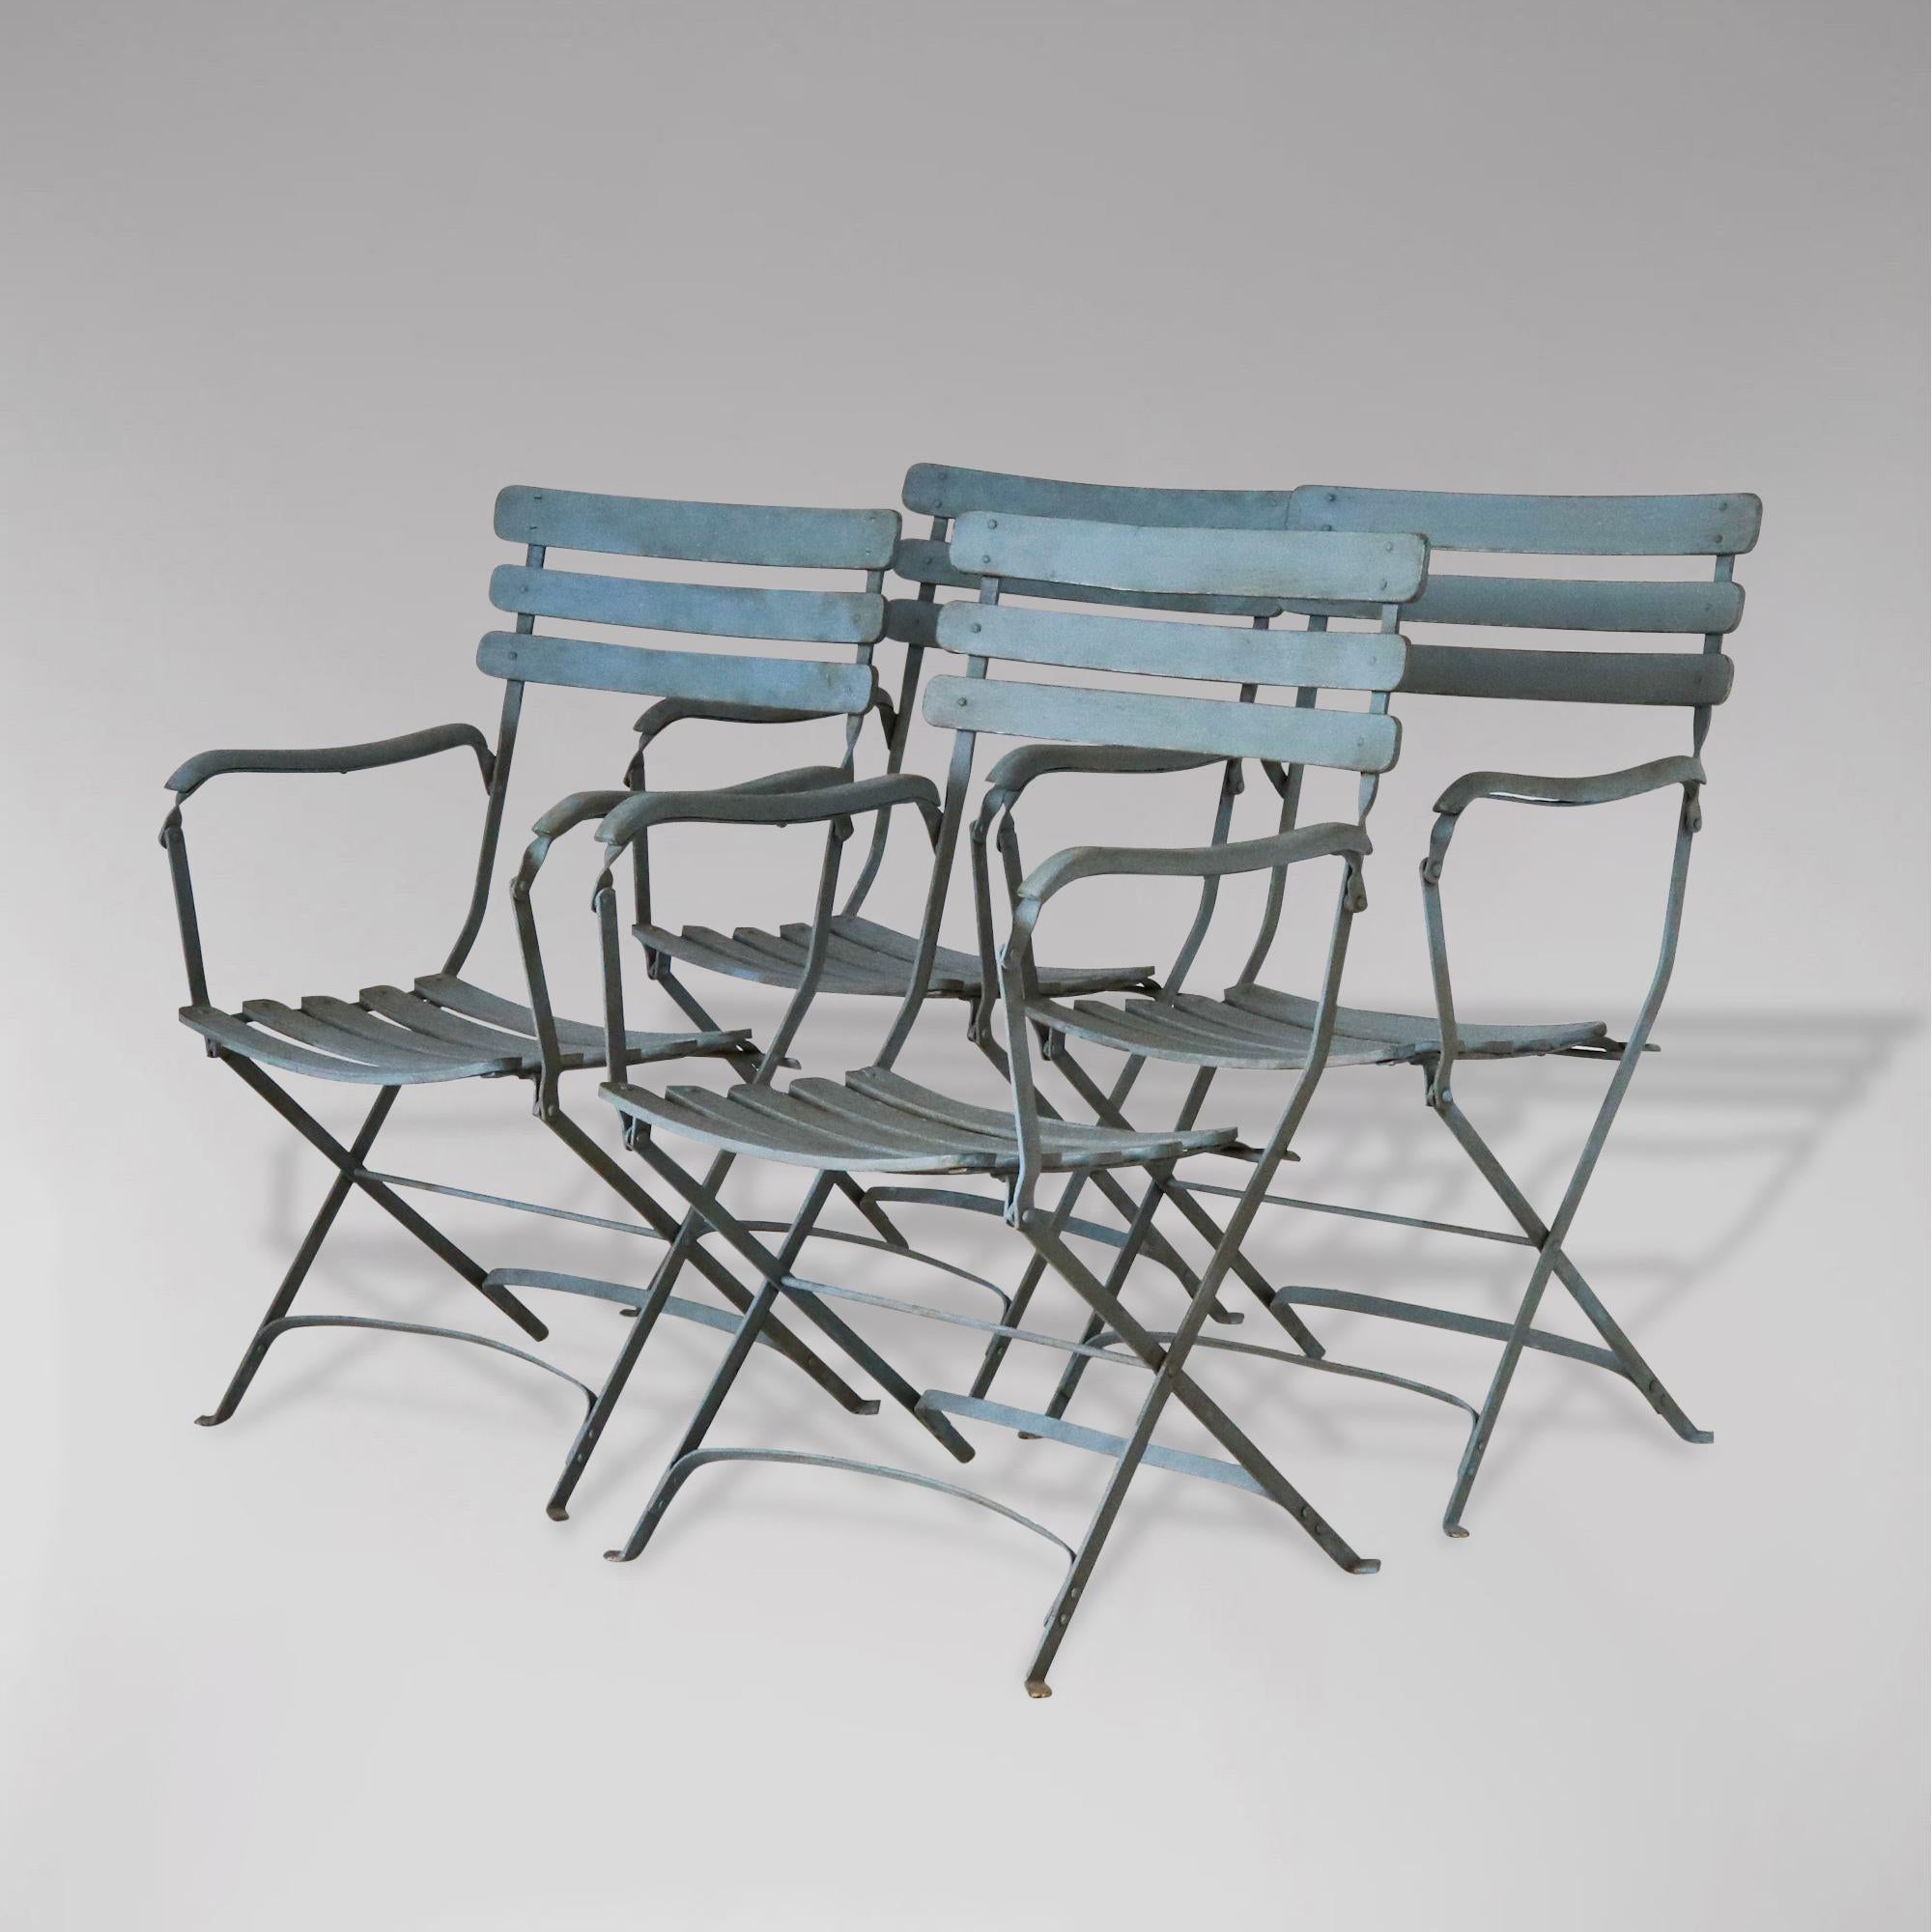 A set of 4 large French painted iron and wood folding garden armchairs. These antique wide armchairs were crafted in Normandy, France, circa 1920. Each chair has a three-ladder back and five-slat seat, and features a folding mechanism for ultimate